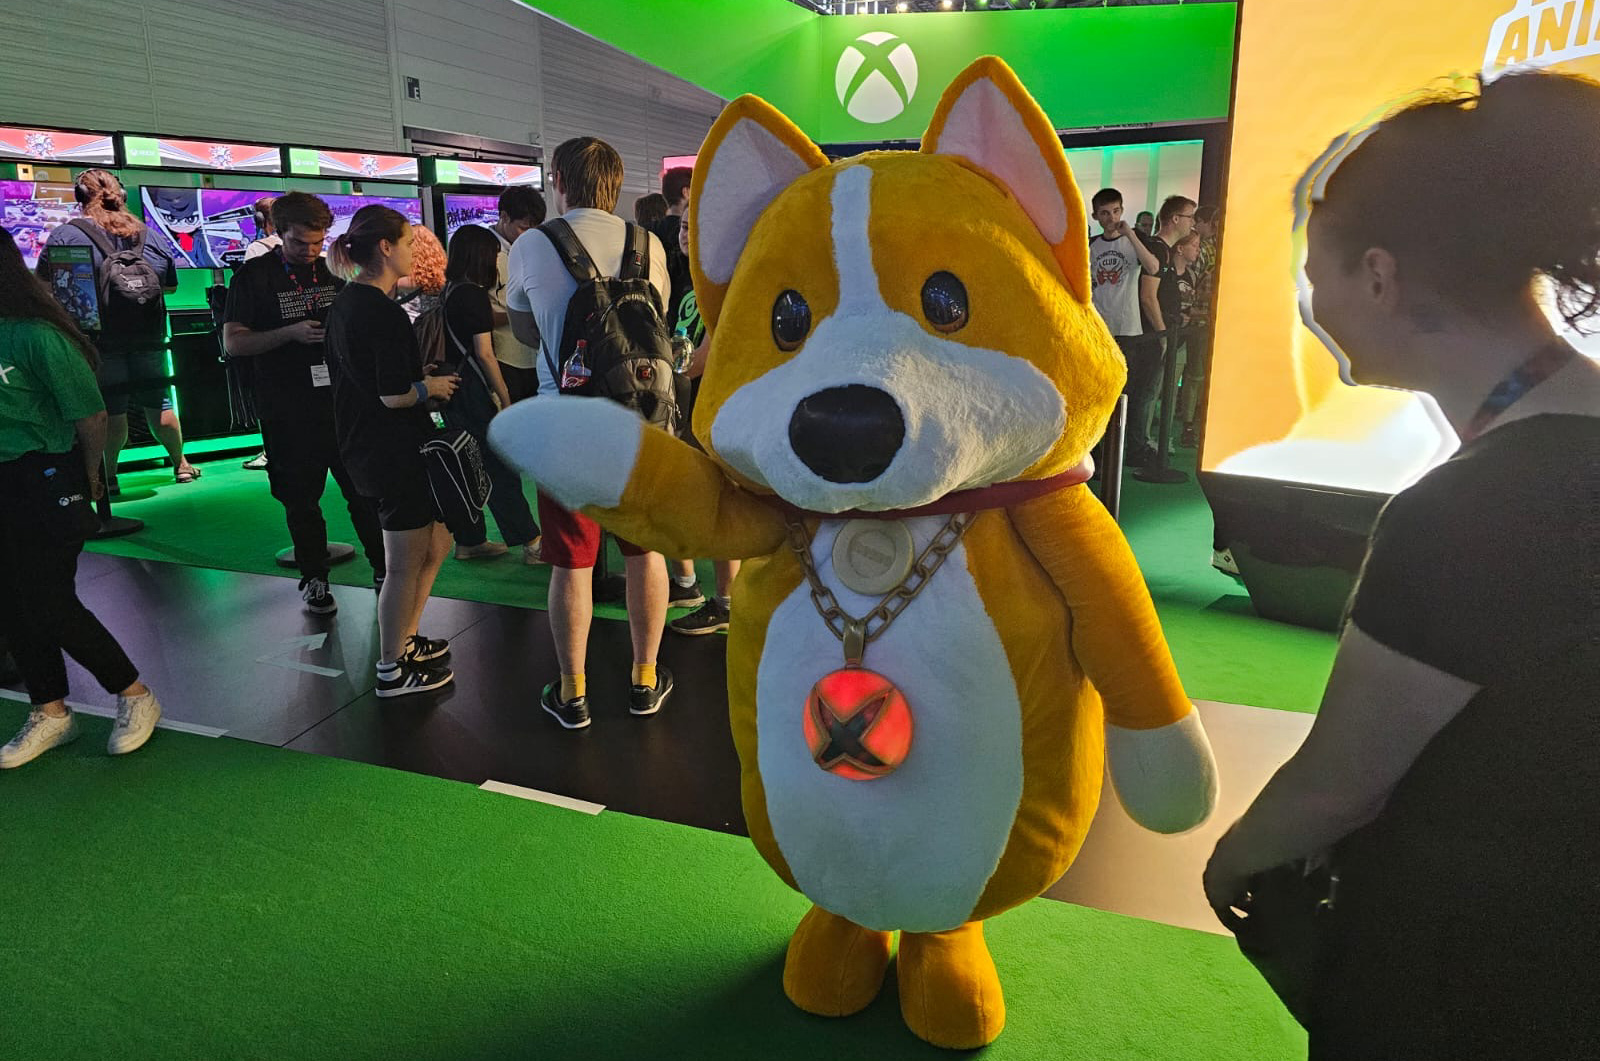 Xbox Booth Image showing a Party Animals mascot.